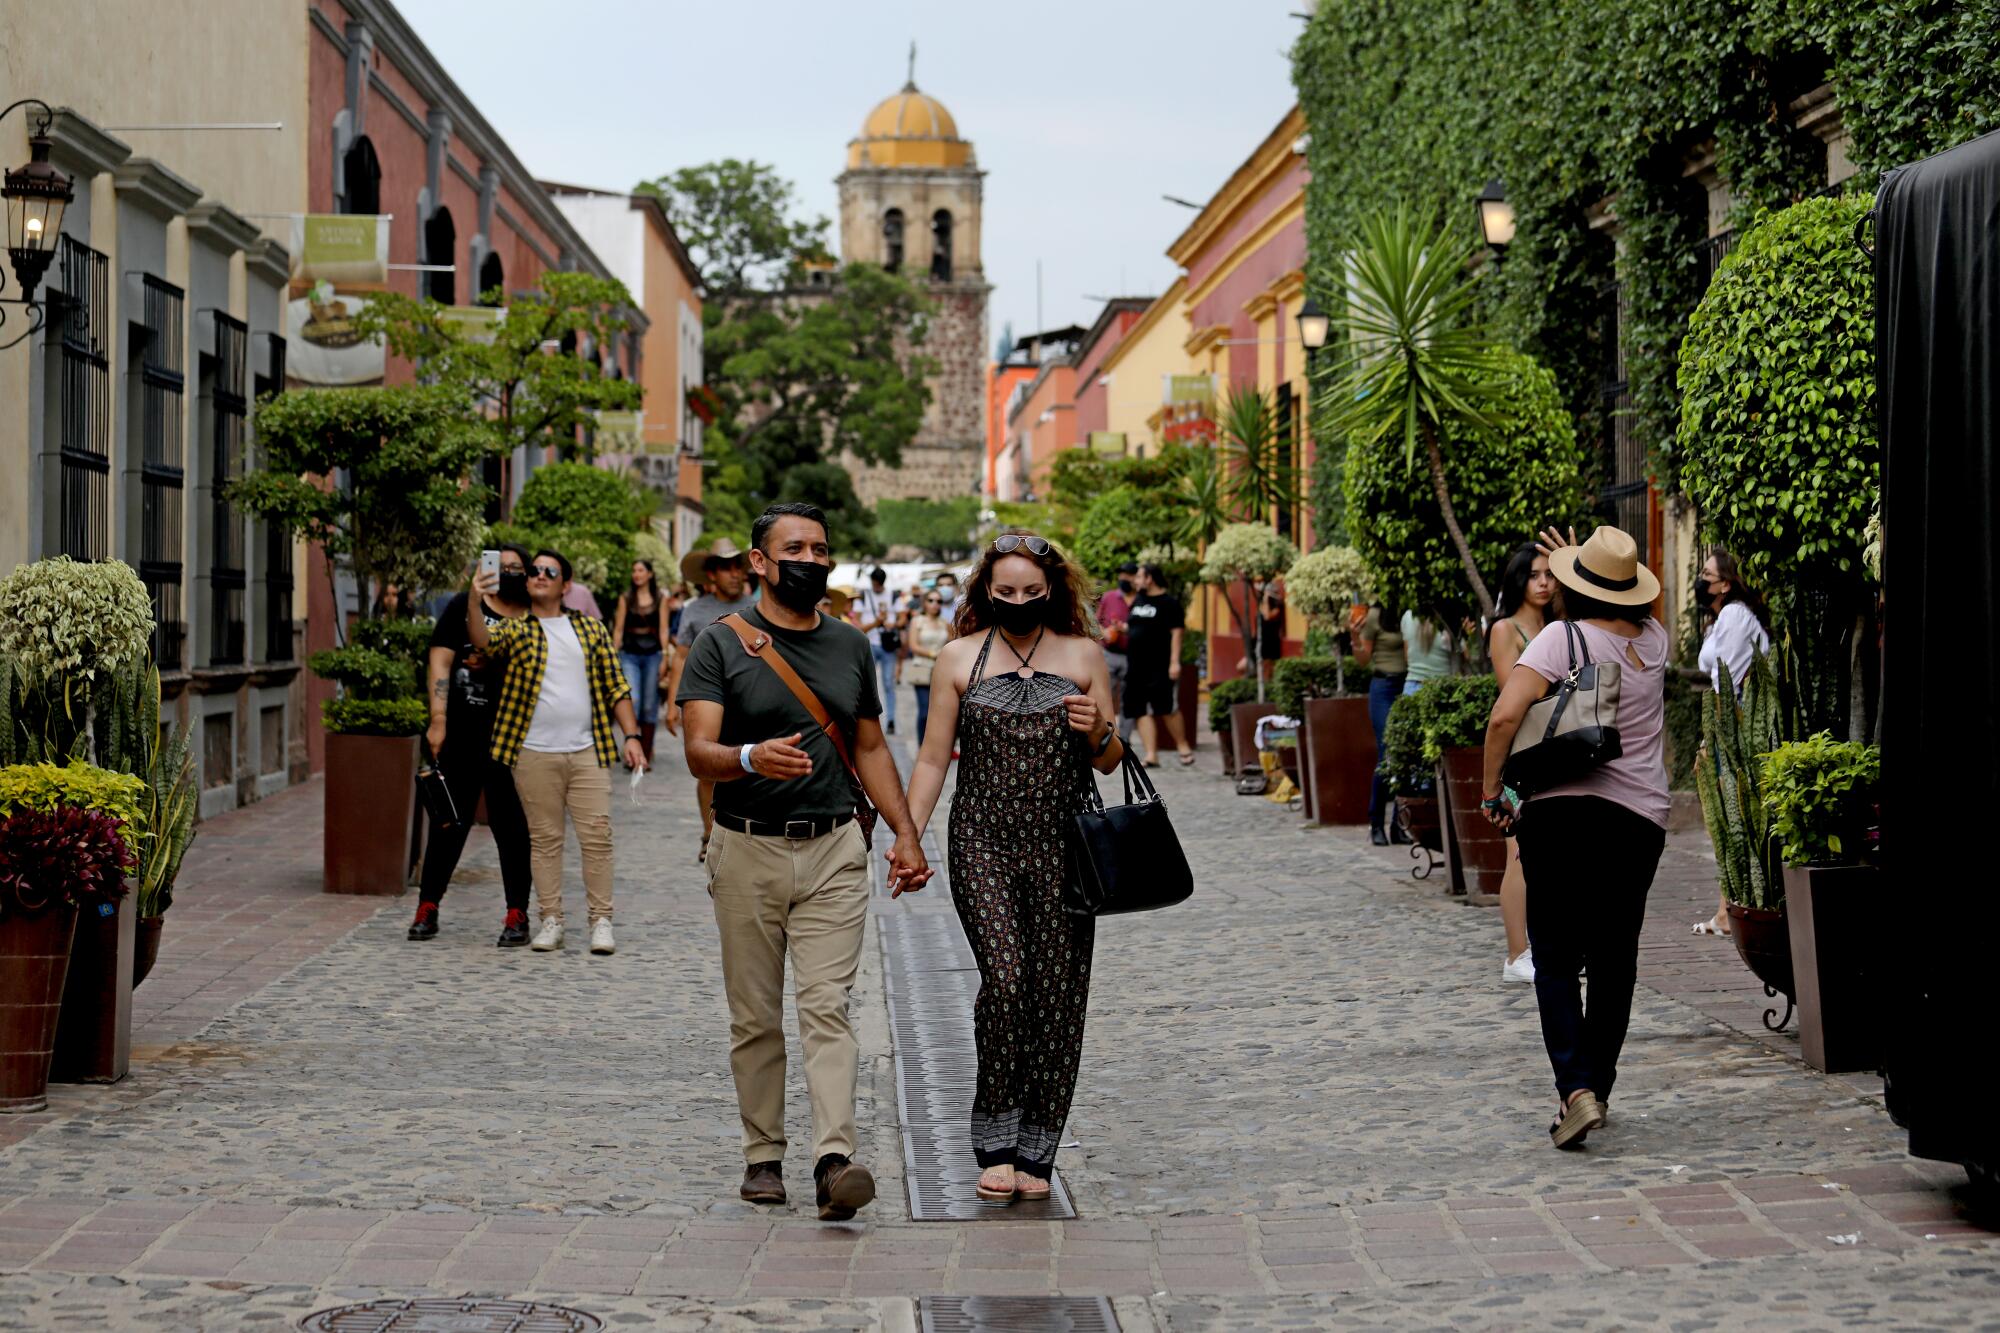 People stroll along Calle Jose Cuervo in Tequila, Jalisco